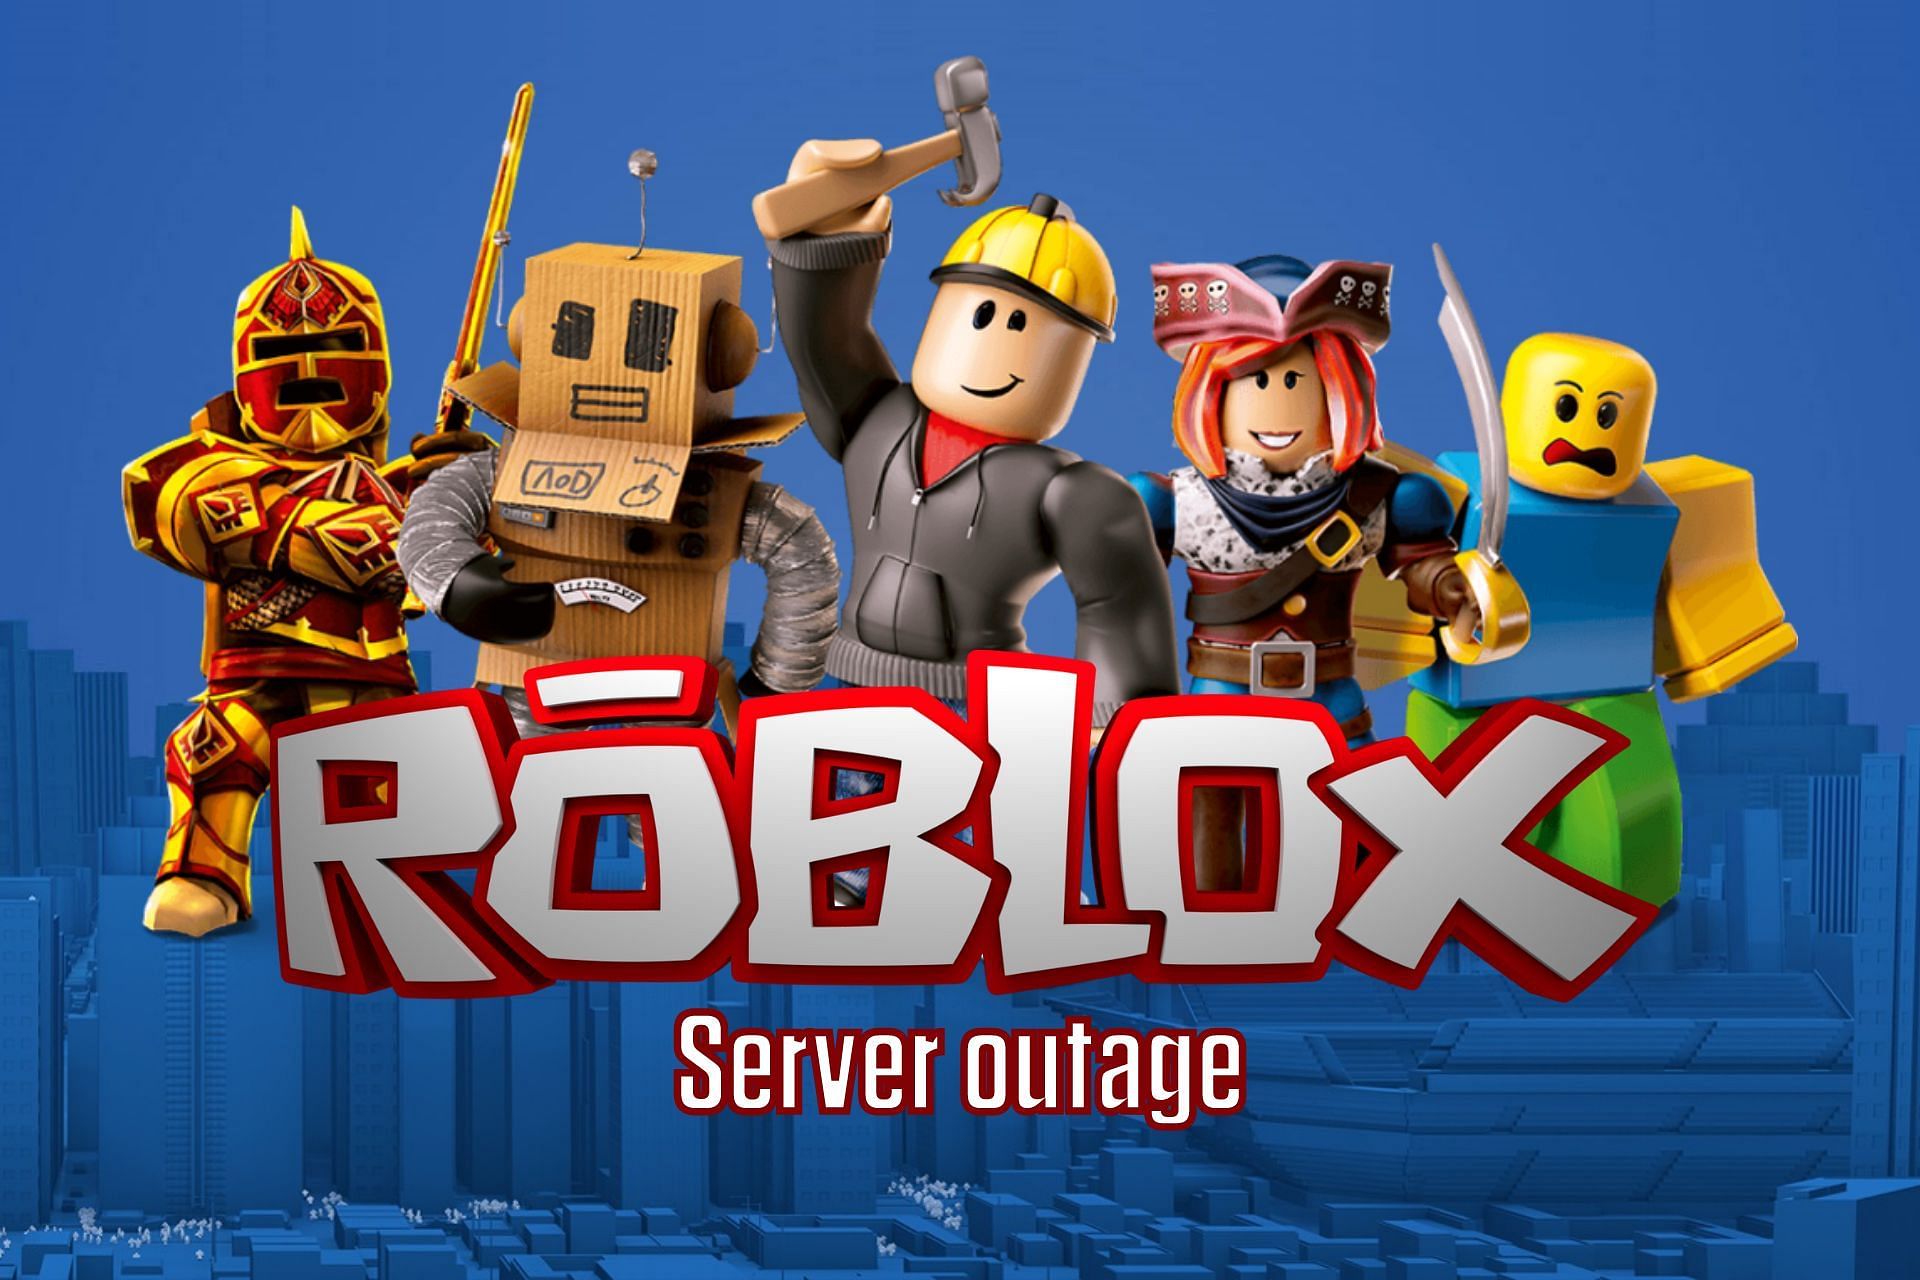 Roblox' Outage May 2022: Is the Server Hacked? Major Issues and